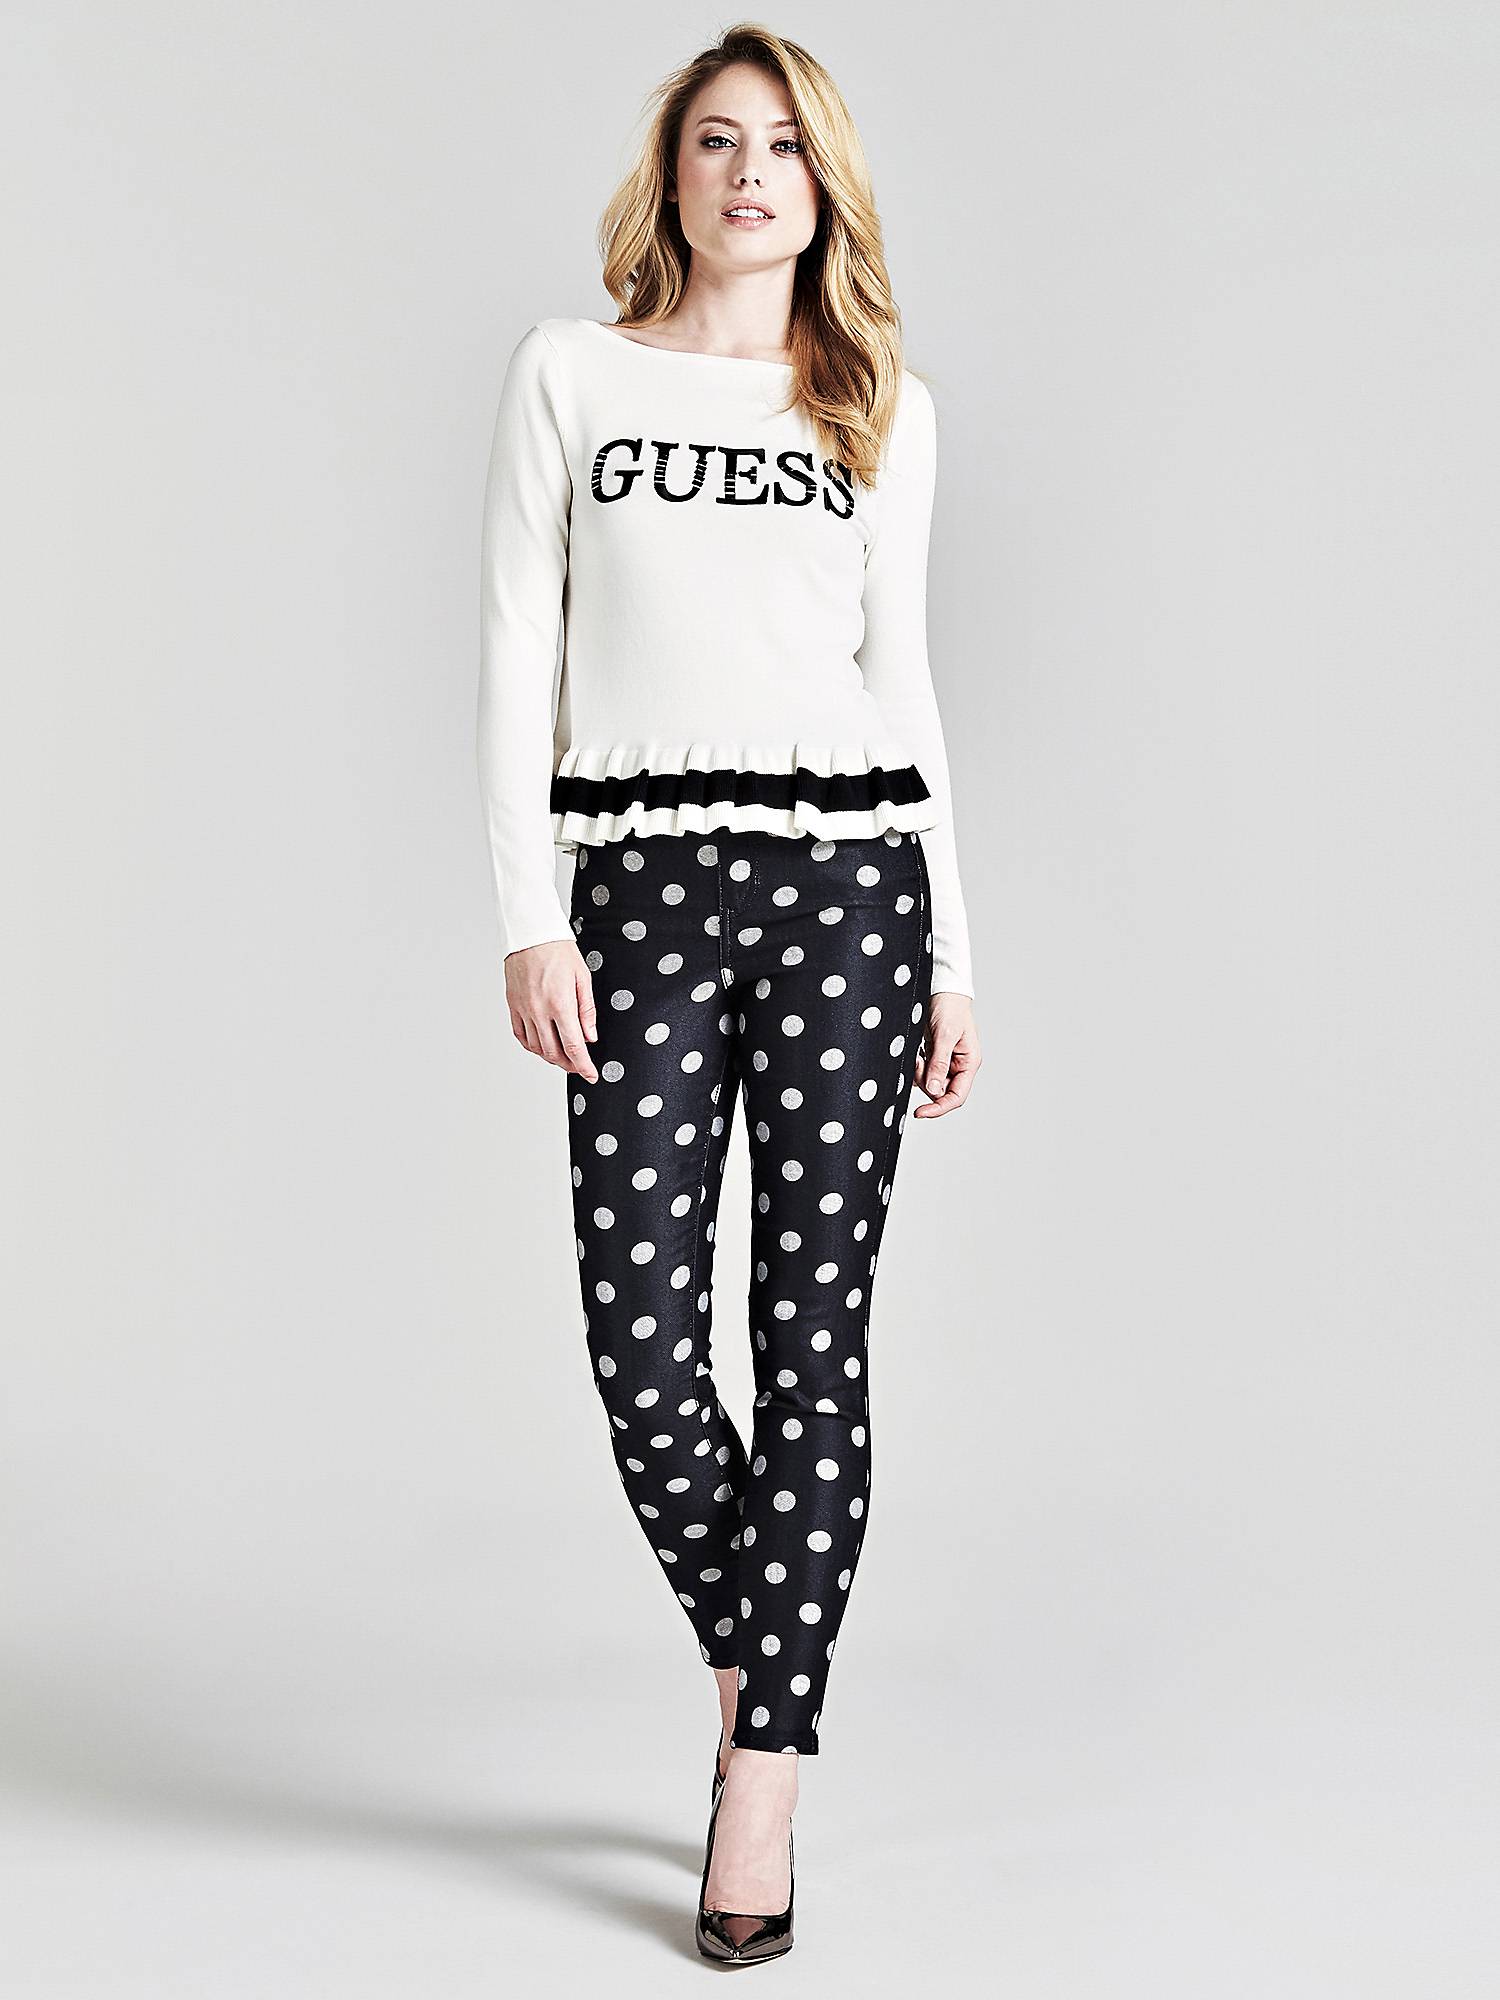 Jeans a pois Guess a 99,90 euro